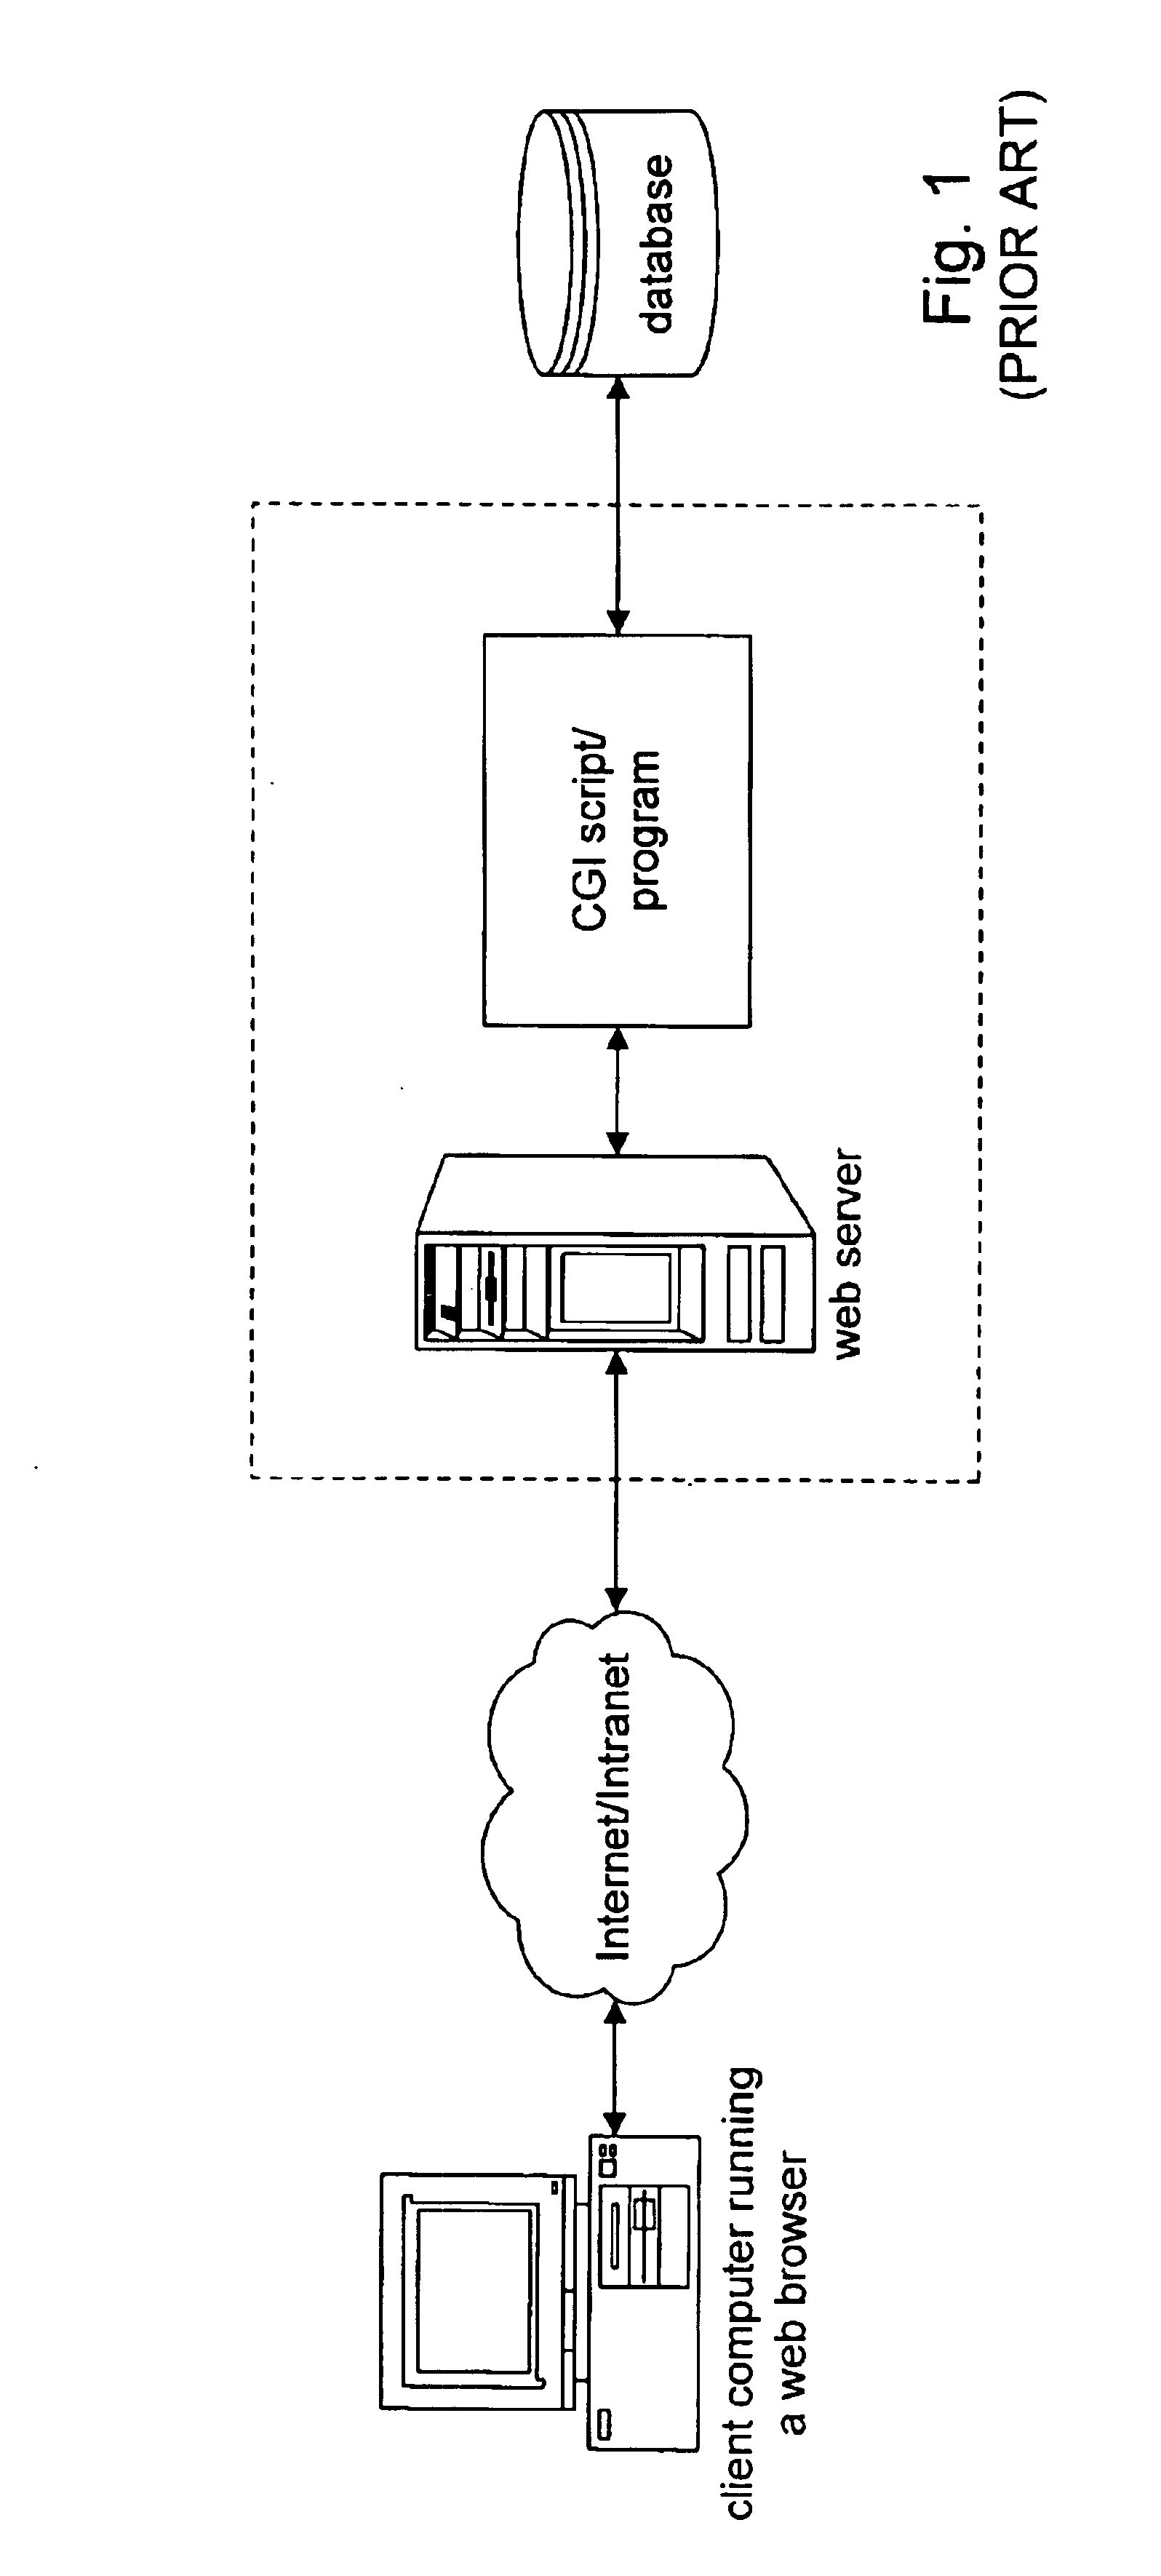 System and method for enabling atomic class loading in an application server environment